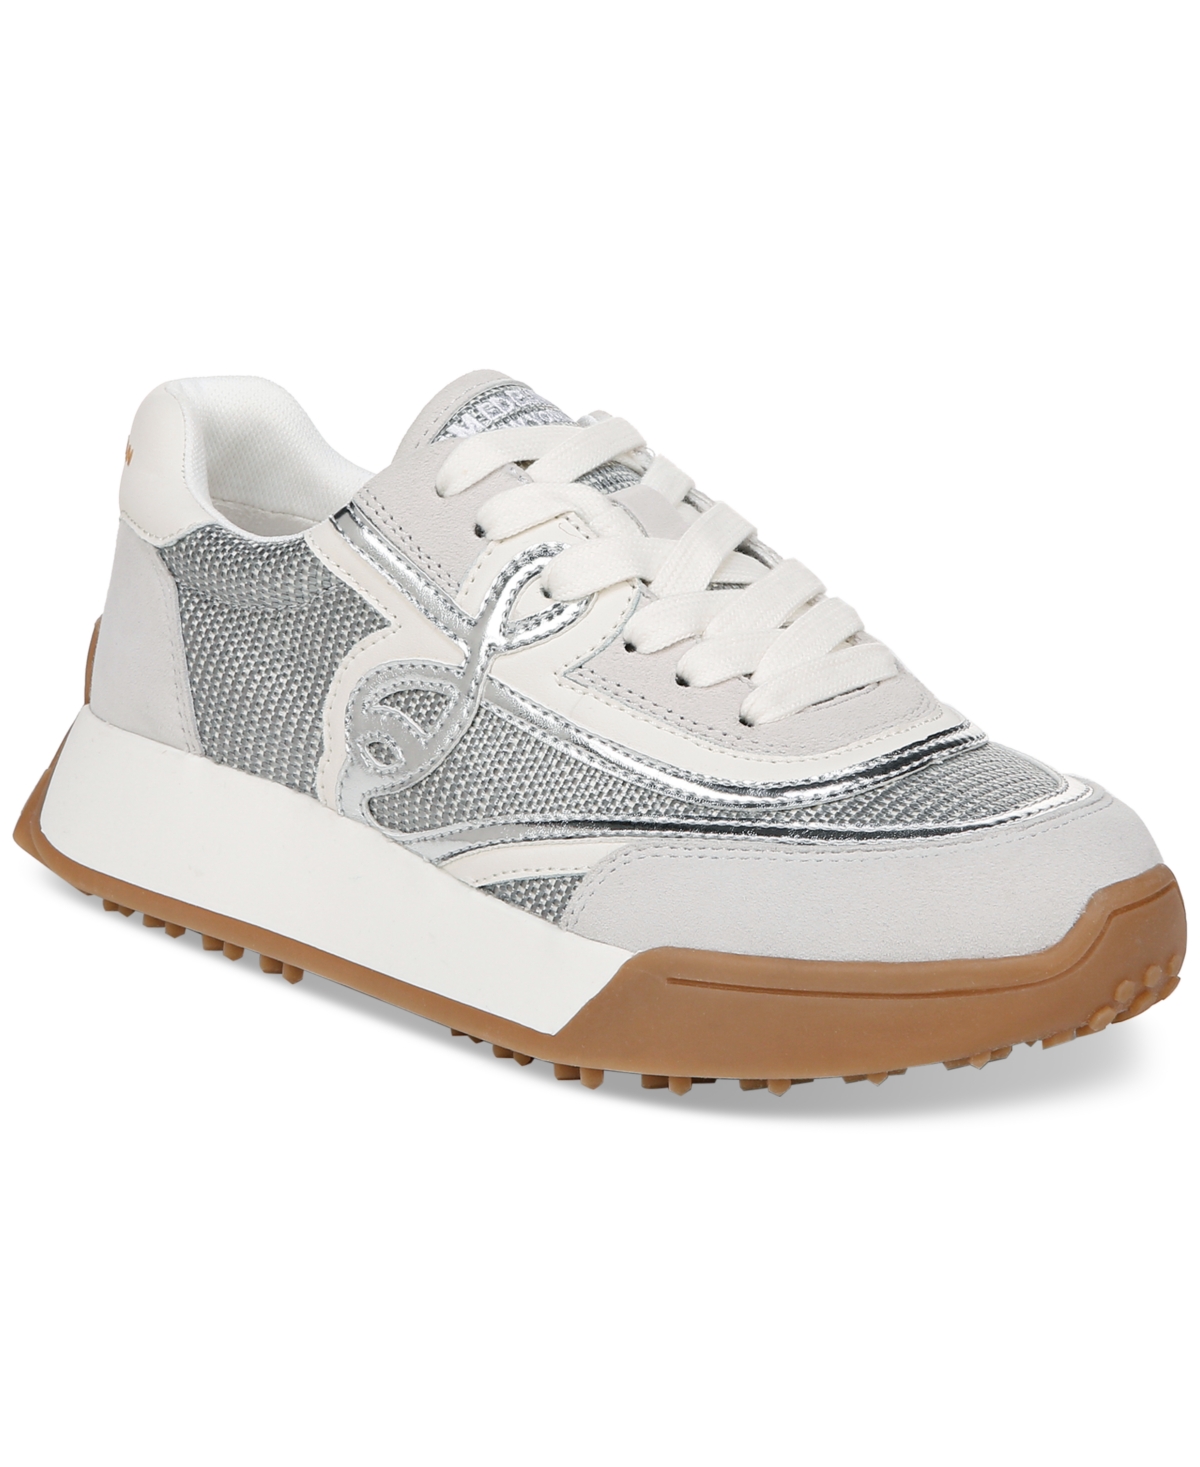 Women's Luna Lace-Up Sneakers - Silver/off White